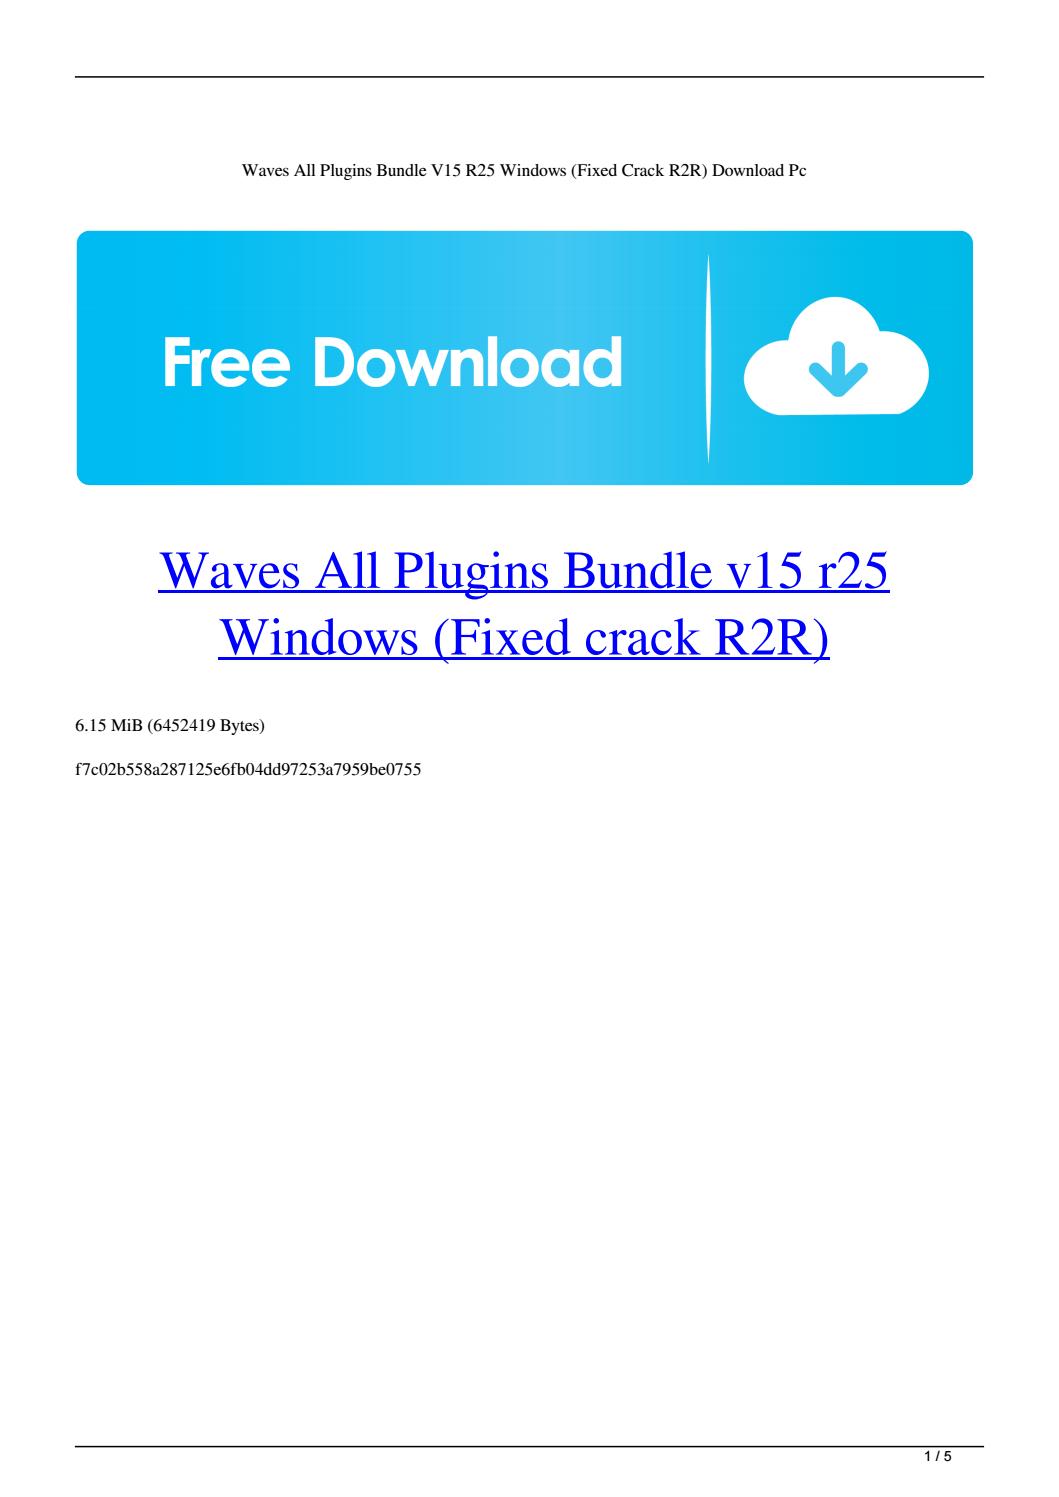 how to install cracked waves bundle v9